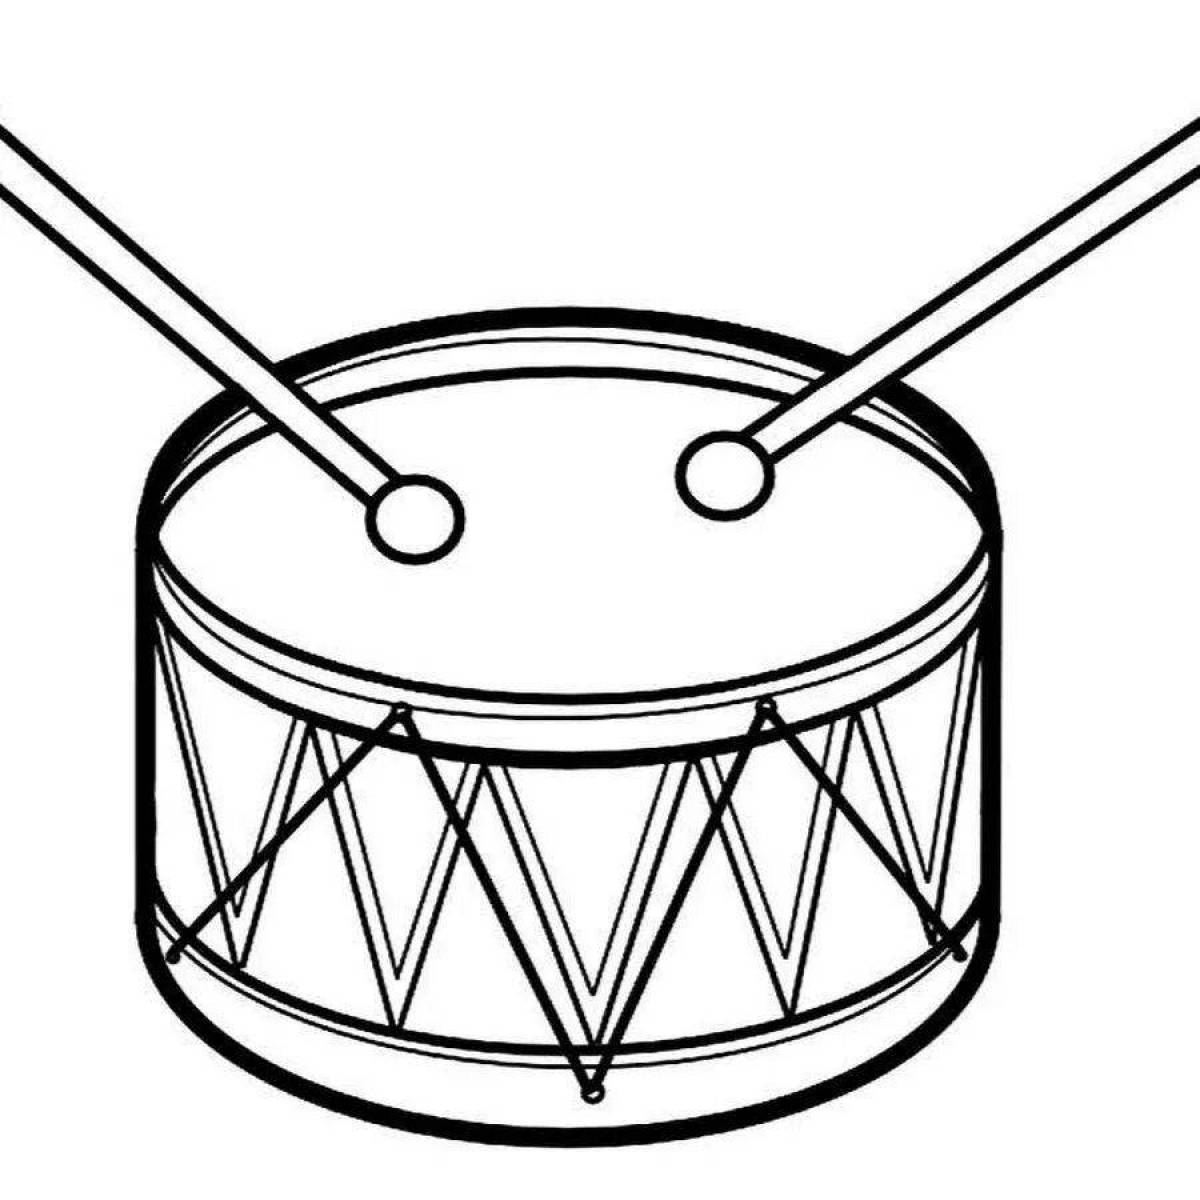 Adorable drum coloring book for 3-4 year olds